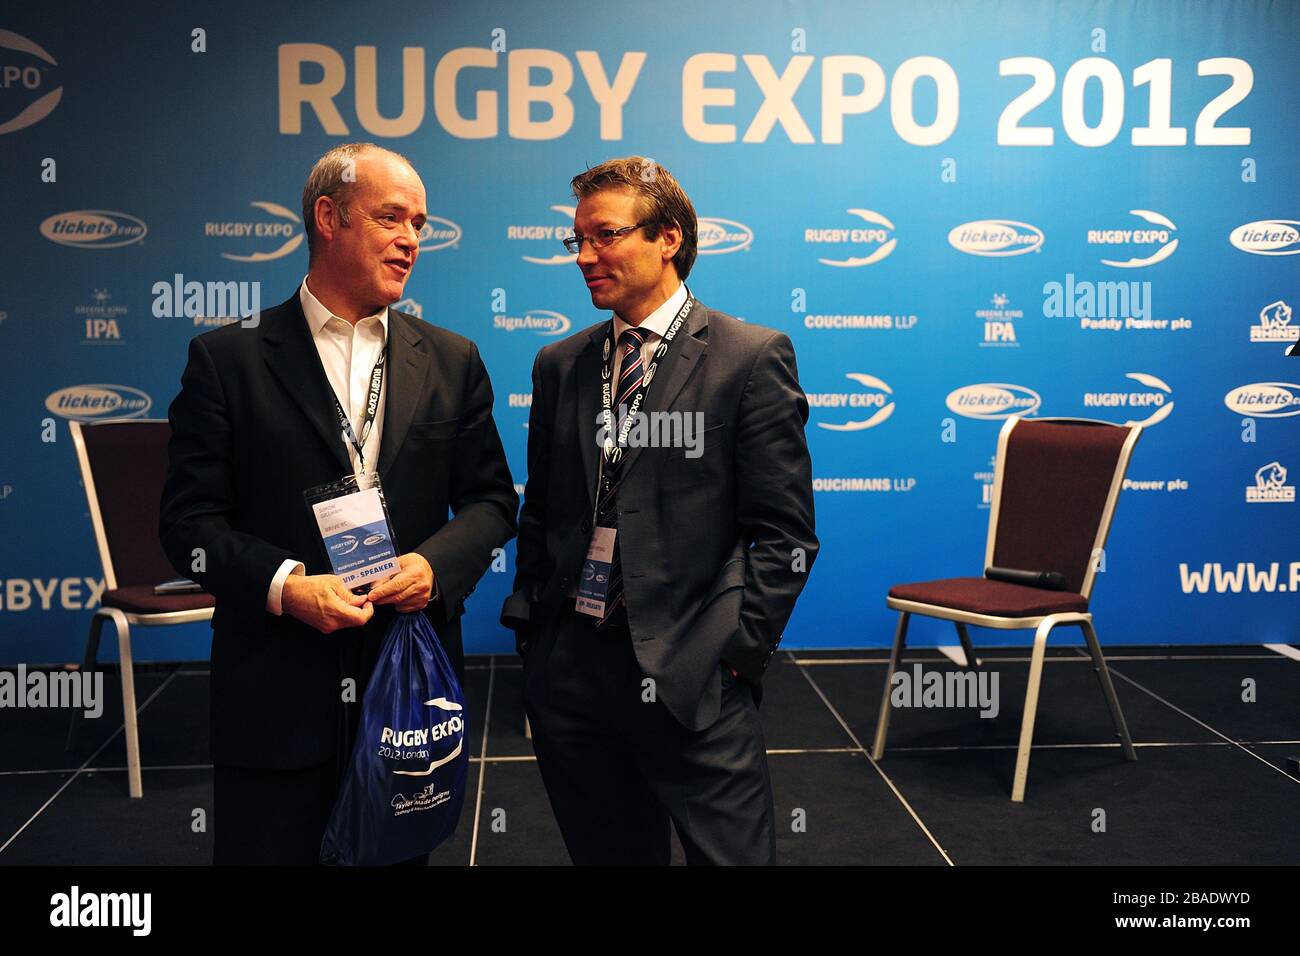 Roger Blitz of the Financial Times speaks with Rob Andrew (right) on Day One of the Rugby Expo 2012 Stock Photo